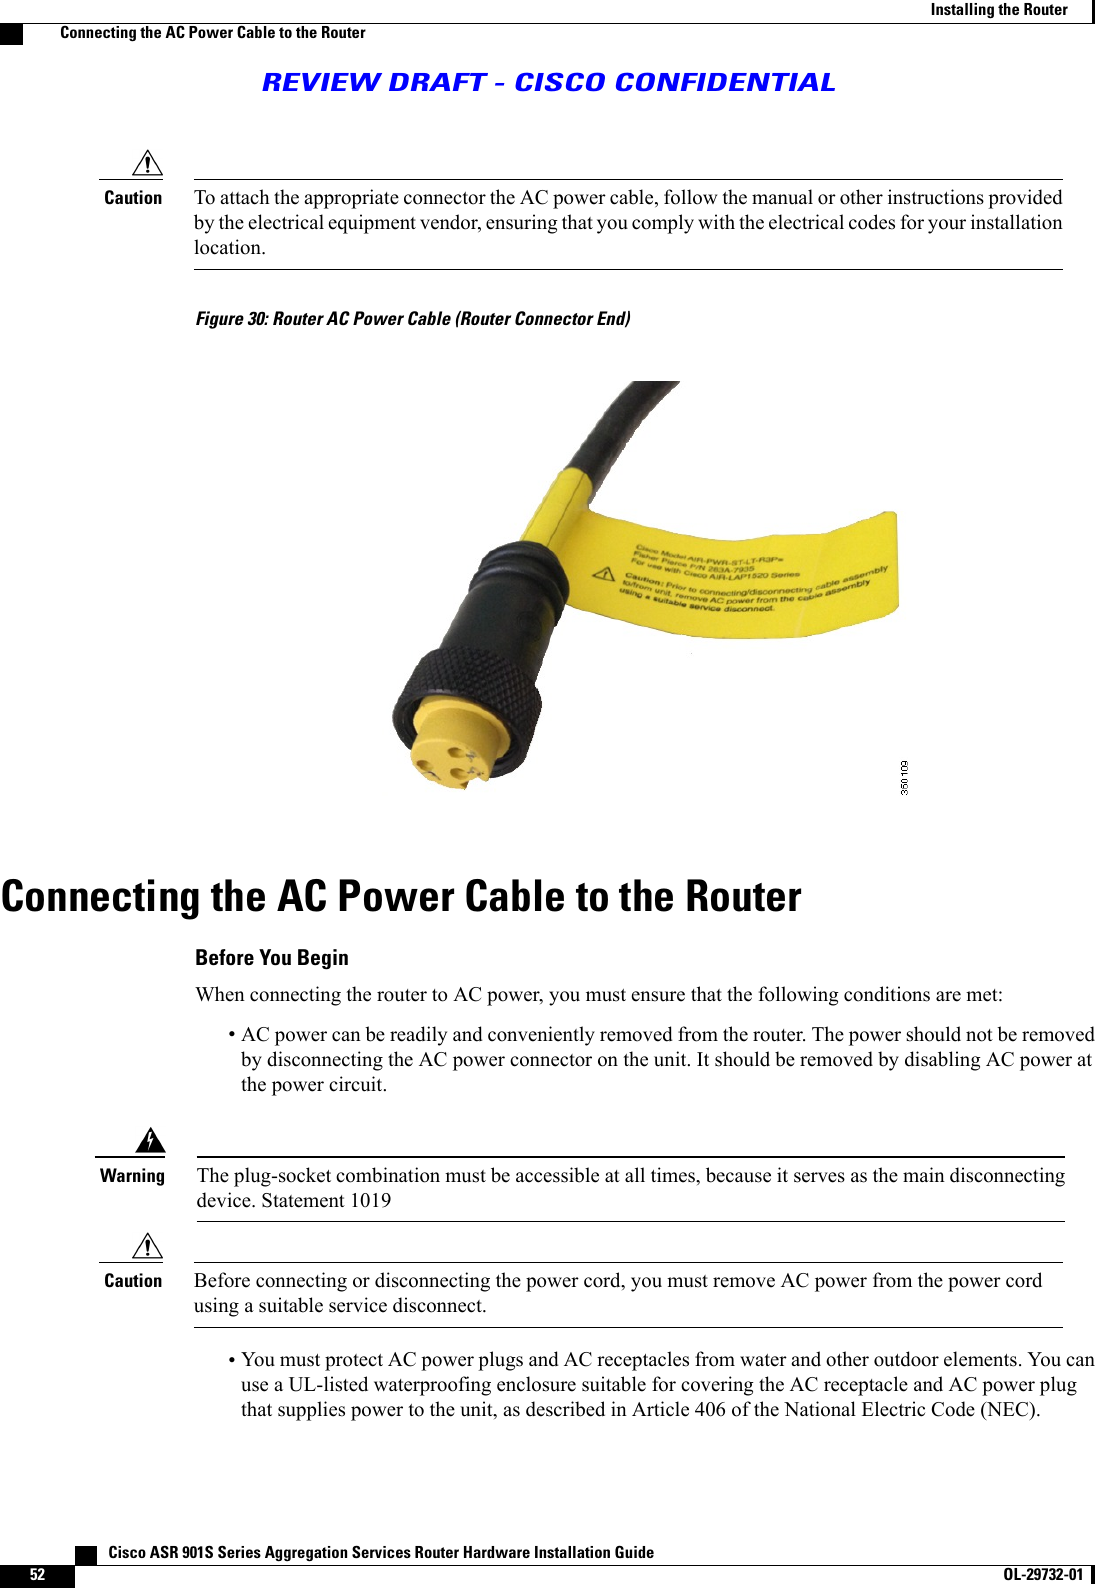 To attach the appropriate connector the AC power cable, follow the manual or other instructions providedby the electrical equipment vendor, ensuring that you comply with the electrical codes for your installationlocation.CautionFigure 30: Router AC Power Cable (Router Connector End)Connecting the AC Power Cable to the RouterBefore You BeginWhen connecting the router to AC power, you must ensure that the following conditions are met:•AC power can be readily and conveniently removed from the router. The power should not be removedby disconnecting the AC power connector on the unit. It should be removed by disabling AC power atthe power circuit.The plug-socket combination must be accessible at all times, because it serves as the main disconnectingdevice. Statement 1019WarningBefore connecting or disconnecting the power cord, you must remove AC power from the power cordusing a suitable service disconnect.Caution•You must protect AC power plugs and AC receptacles from water and other outdoor elements. You canuse a UL-listed waterproofing enclosure suitable for covering the AC receptacle and AC power plugthat supplies power to the unit, as described in Article 406 of the National Electric Code (NEC).   Cisco ASR 901S Series Aggregation Services Router Hardware Installation Guide52 OL-29732-01  Installing the RouterConnecting the AC Power Cable to the RouterREVIEW DRAFT - CISCO CONFIDENTIAL